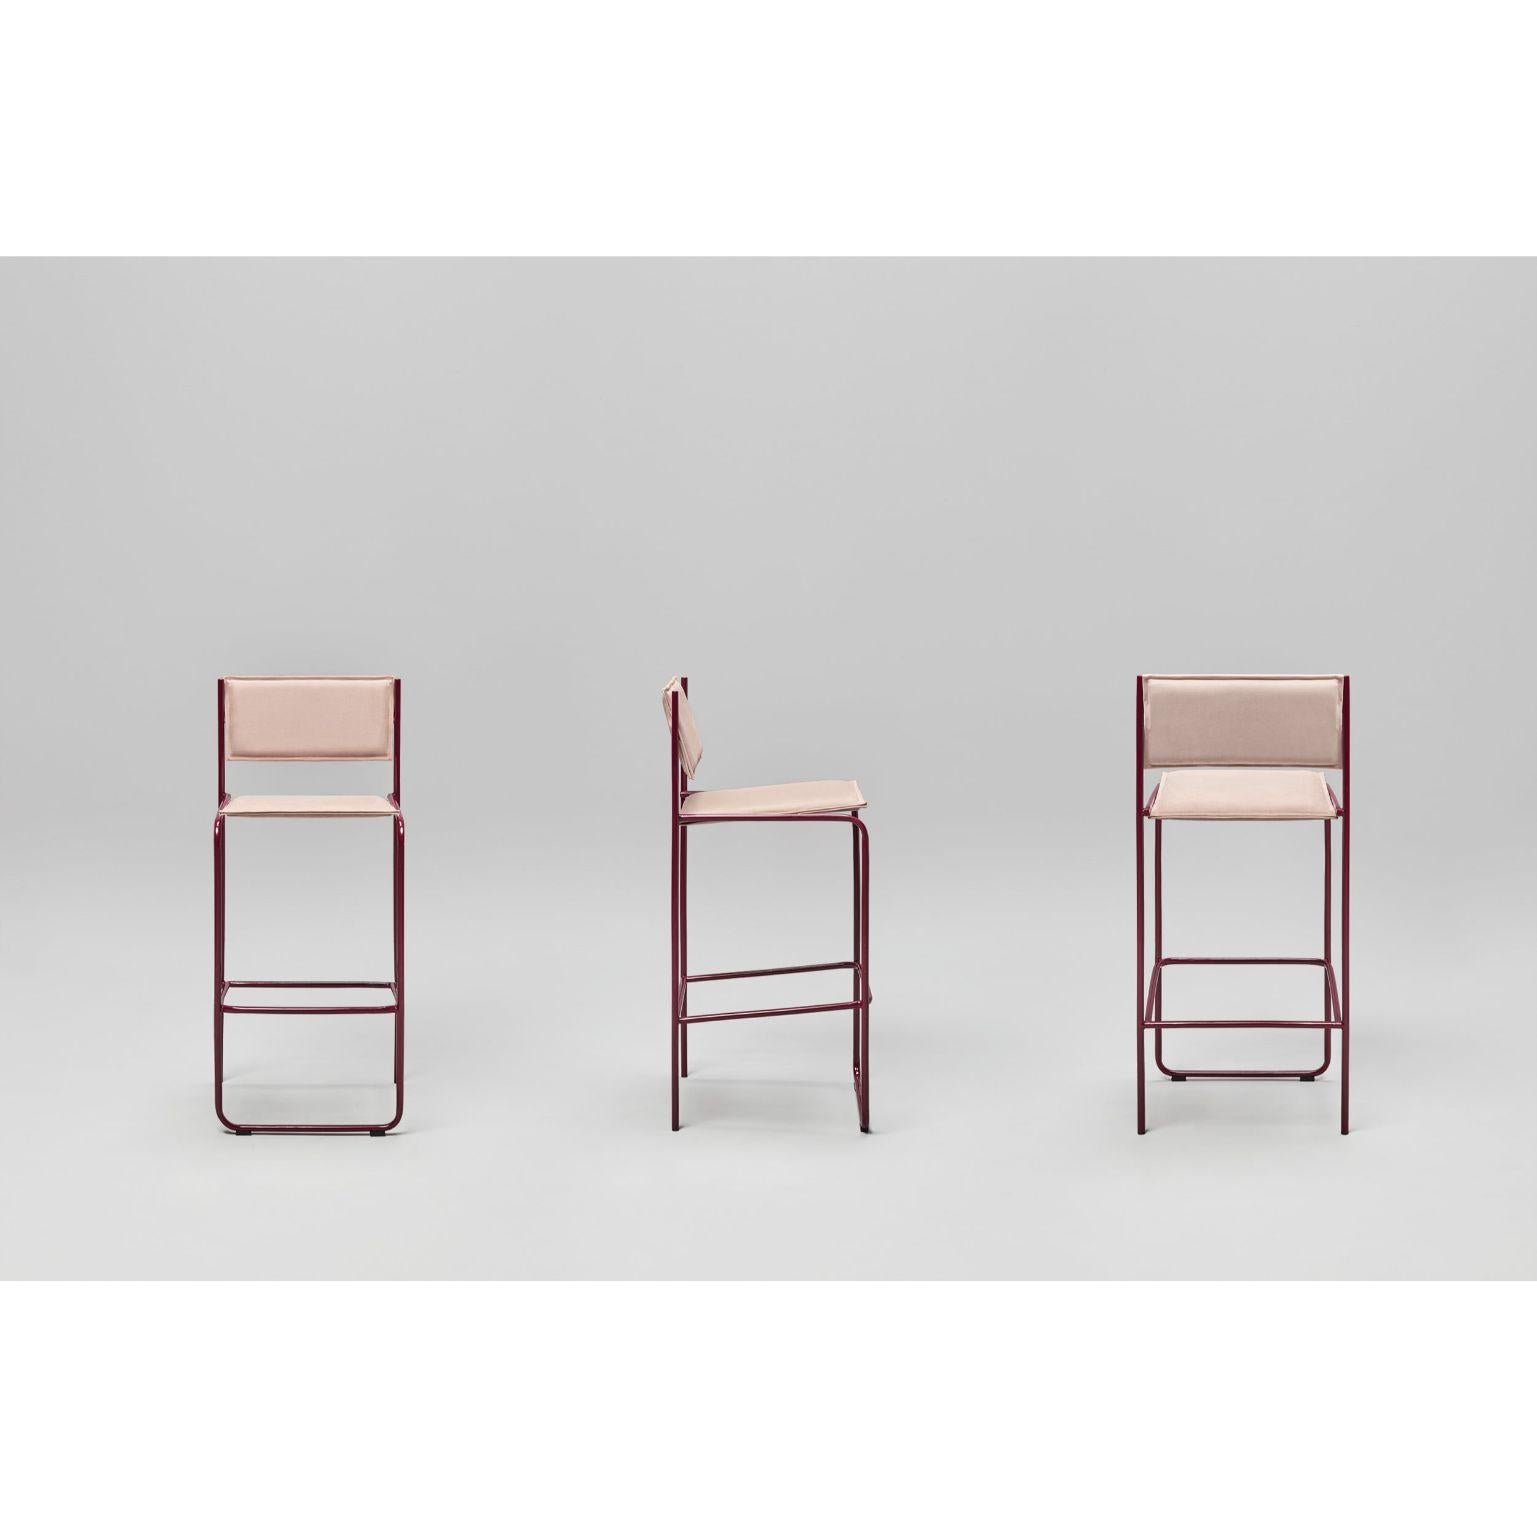 Trampolín stool by Cuatro Cuatros
Dimensions: W47, D49, H103, Seat76
Materials: Chrome plated or painted iron structure
Foam CMHR (high resilience and flame retardant) for all our cushion filling systems
Removable backrest and seat covers
